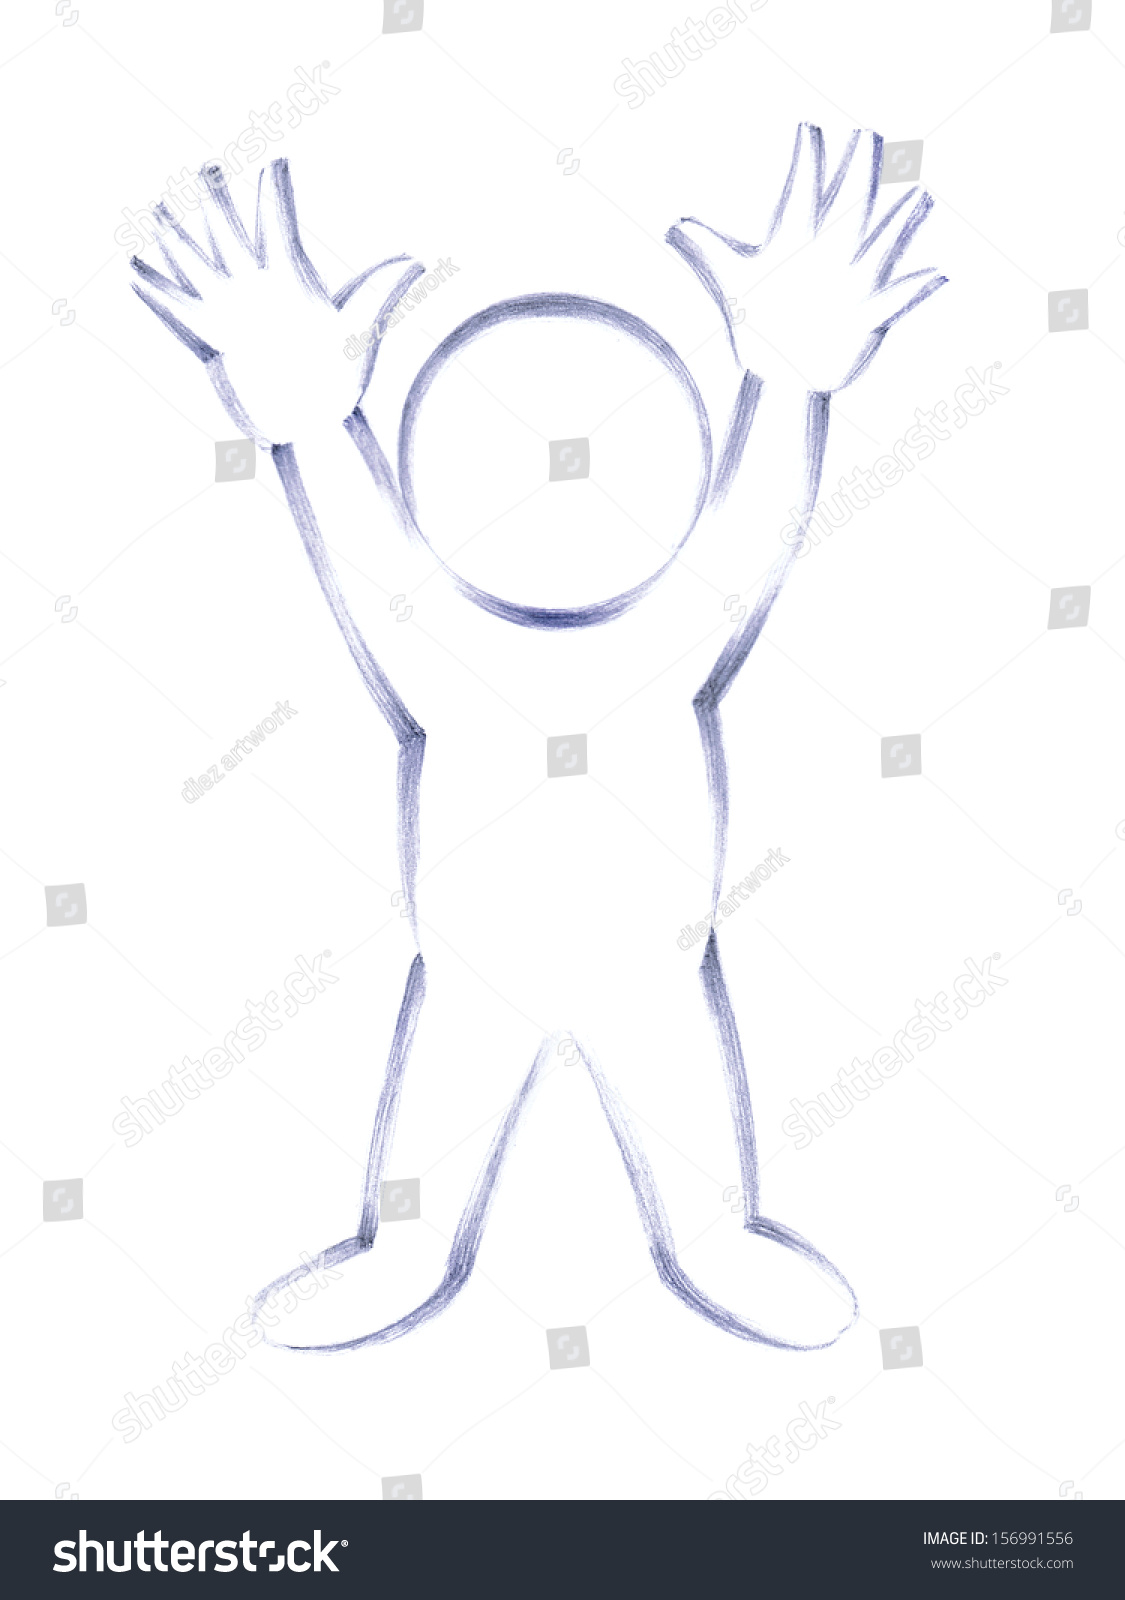 Handmade Pencil Drawing Person Holding Hands Stock Illustration